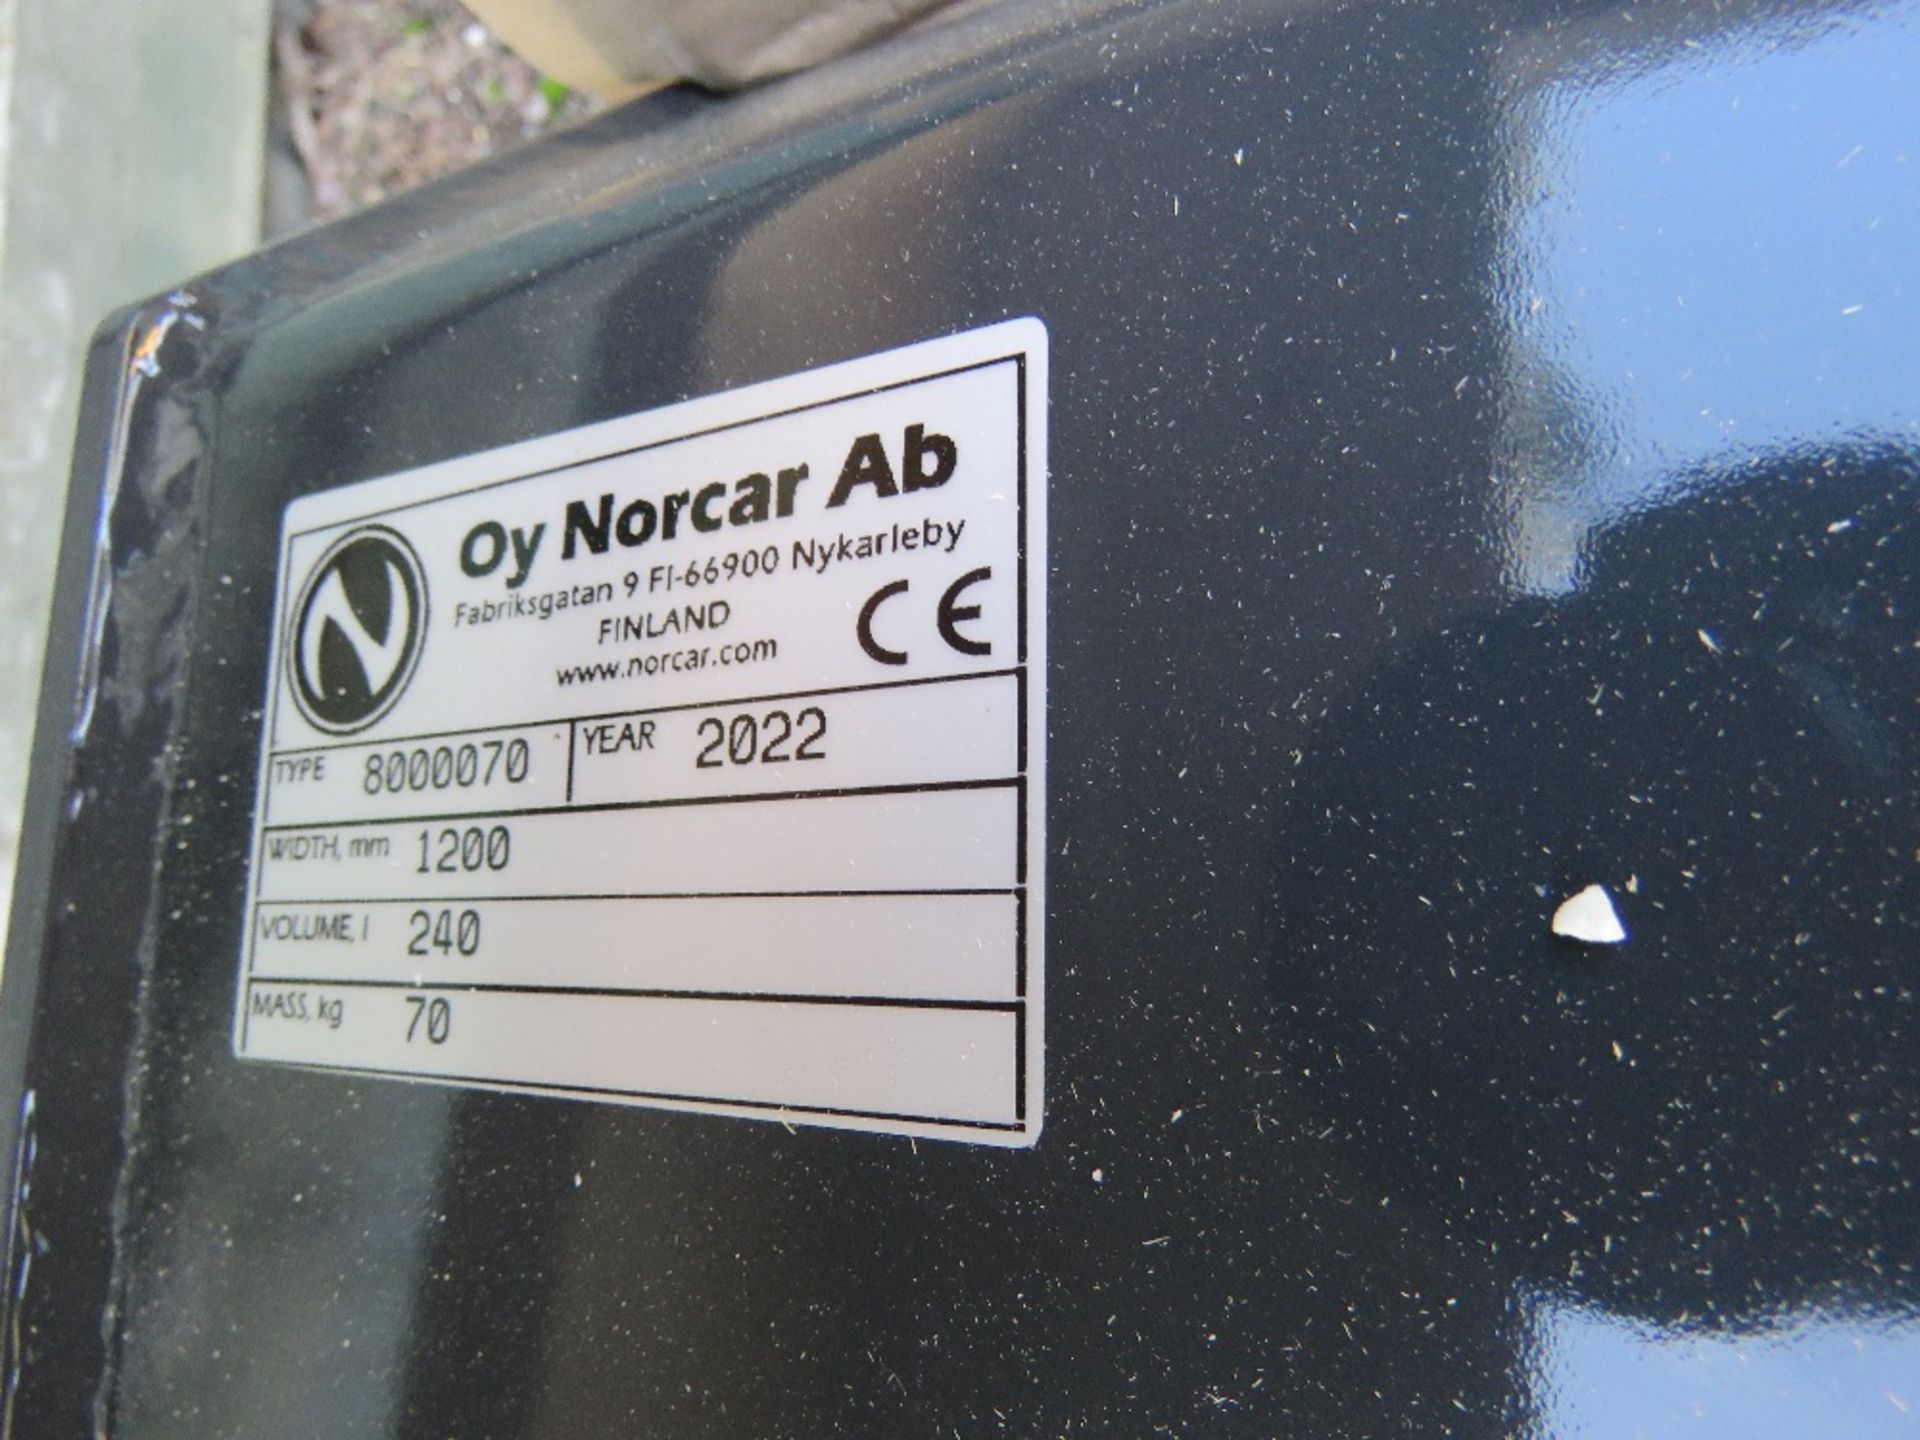 2 X NORCAR BRANDED 1.2M WIDE LOADER BUCKETS WITH BRACKETS TO FIT AVANT, MULTI ONE OR NORCAR LOADERS, - Image 4 of 4